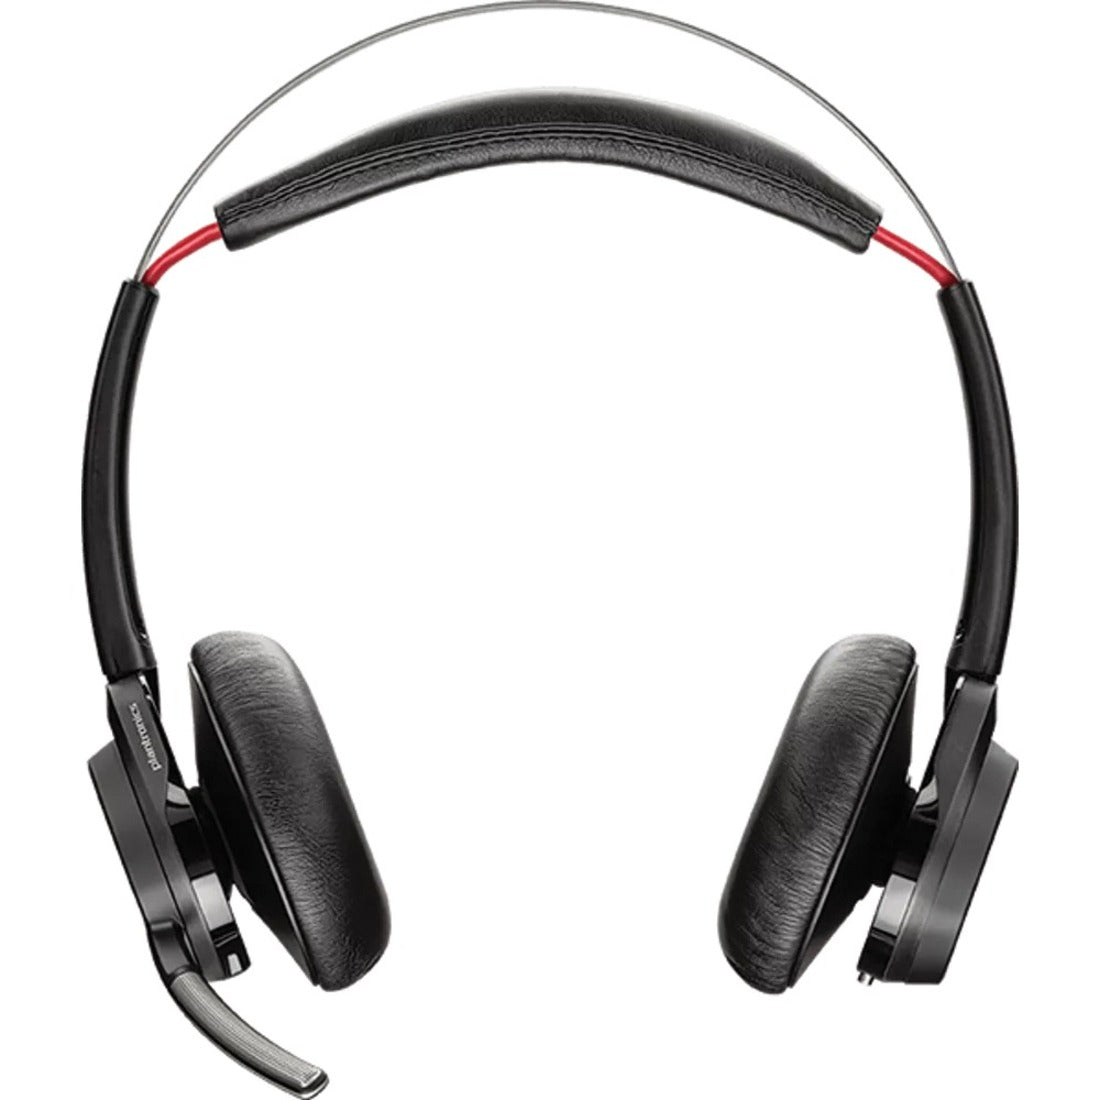 Poly 202653-102 Voyager Focus UC B825-M Headset, Wireless Bluetooth Headset with Active Noise Canceling